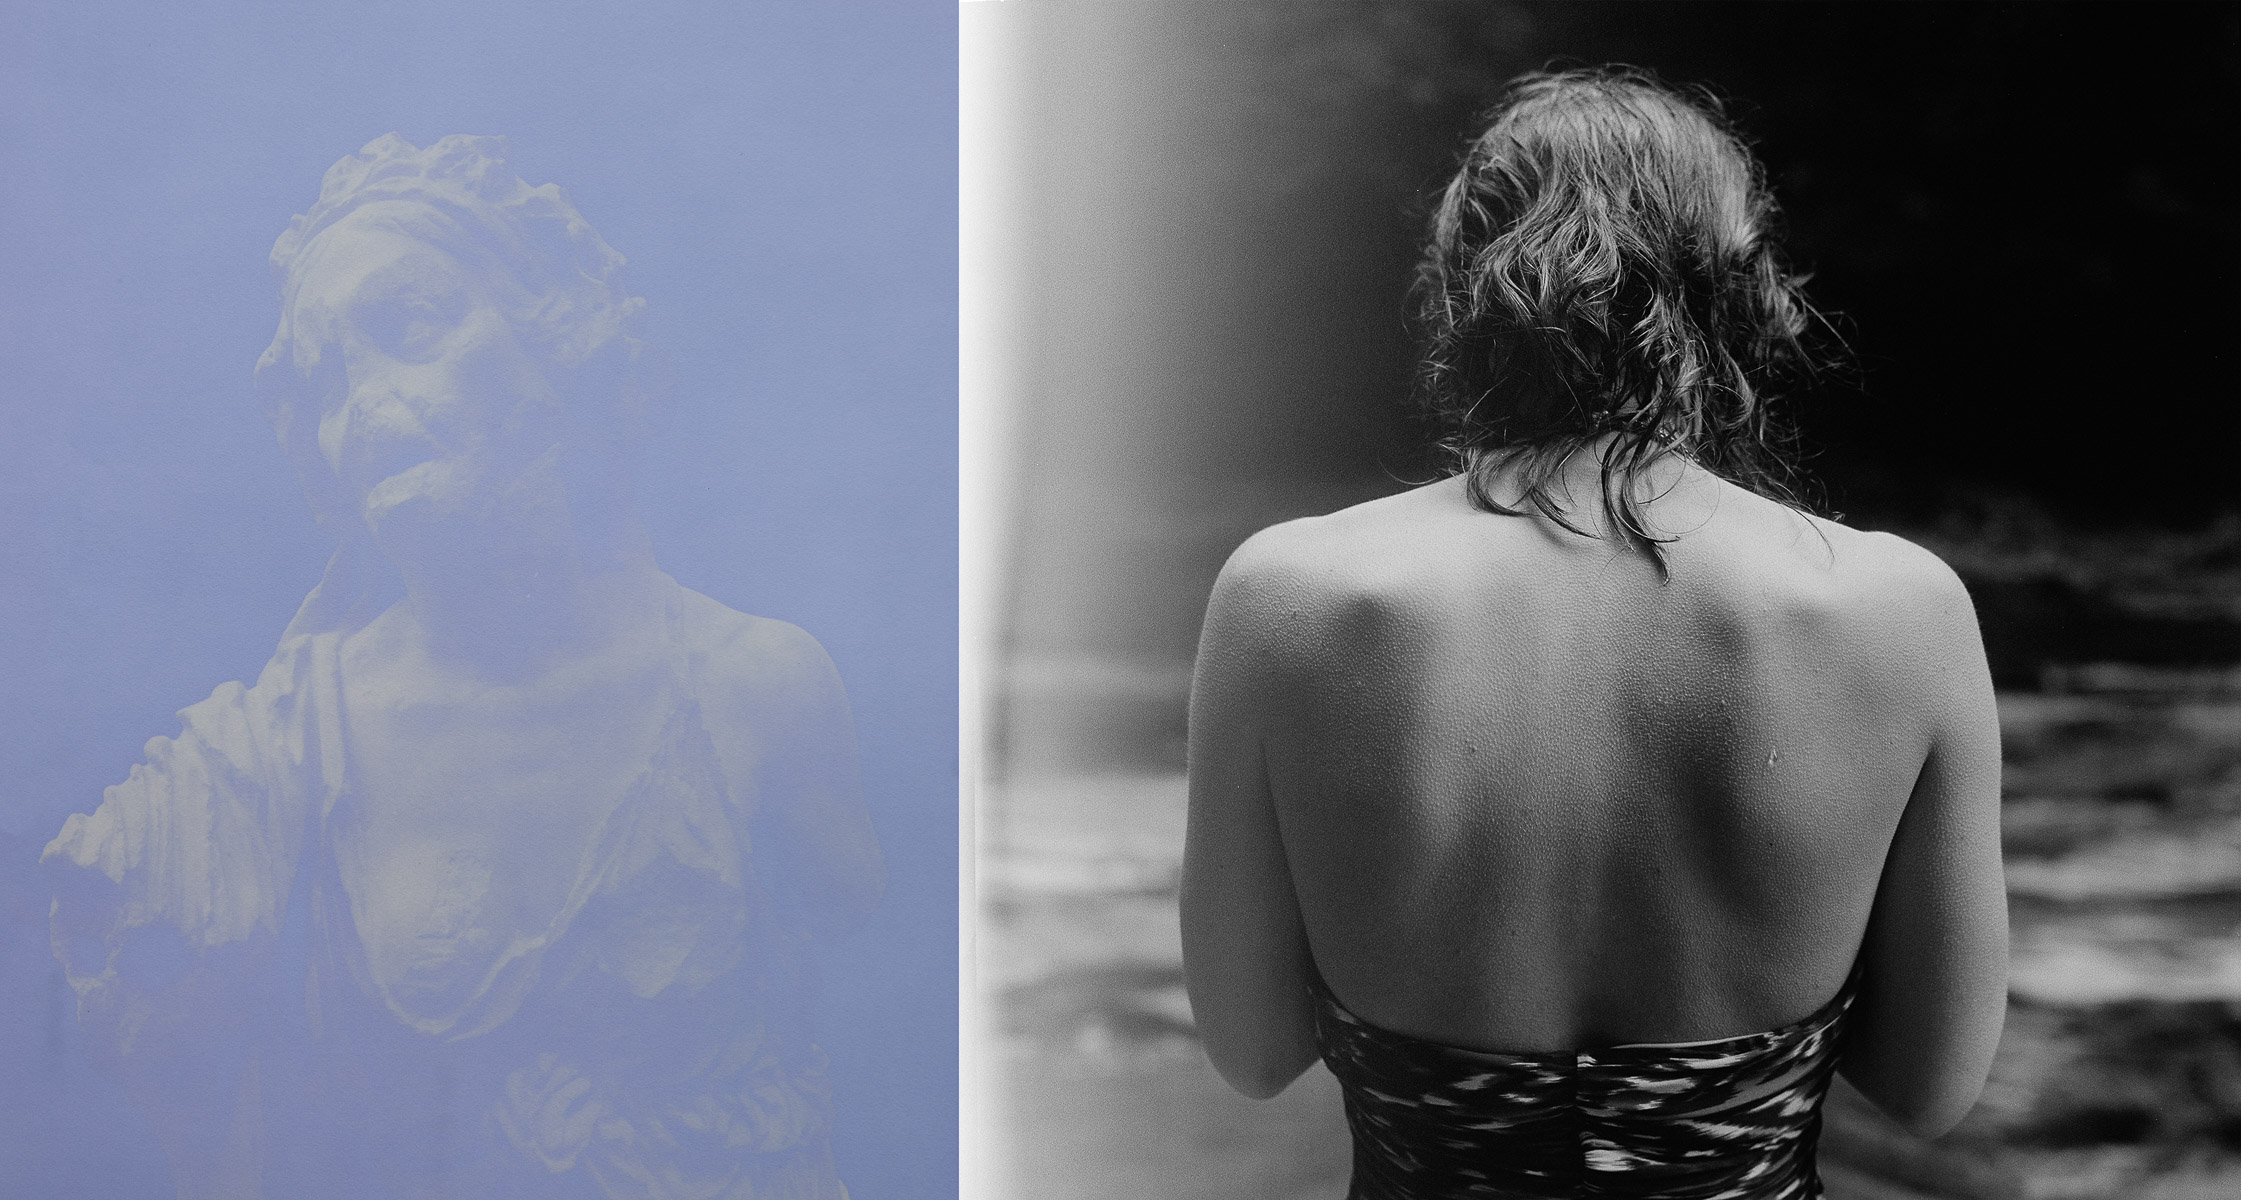    Pillars of Salt   (diptych), 2014 Left: Anthotype 23 x 19 inches Right: Silver gelatin print 23 x 23 inches Ed: 3 + 2AP   